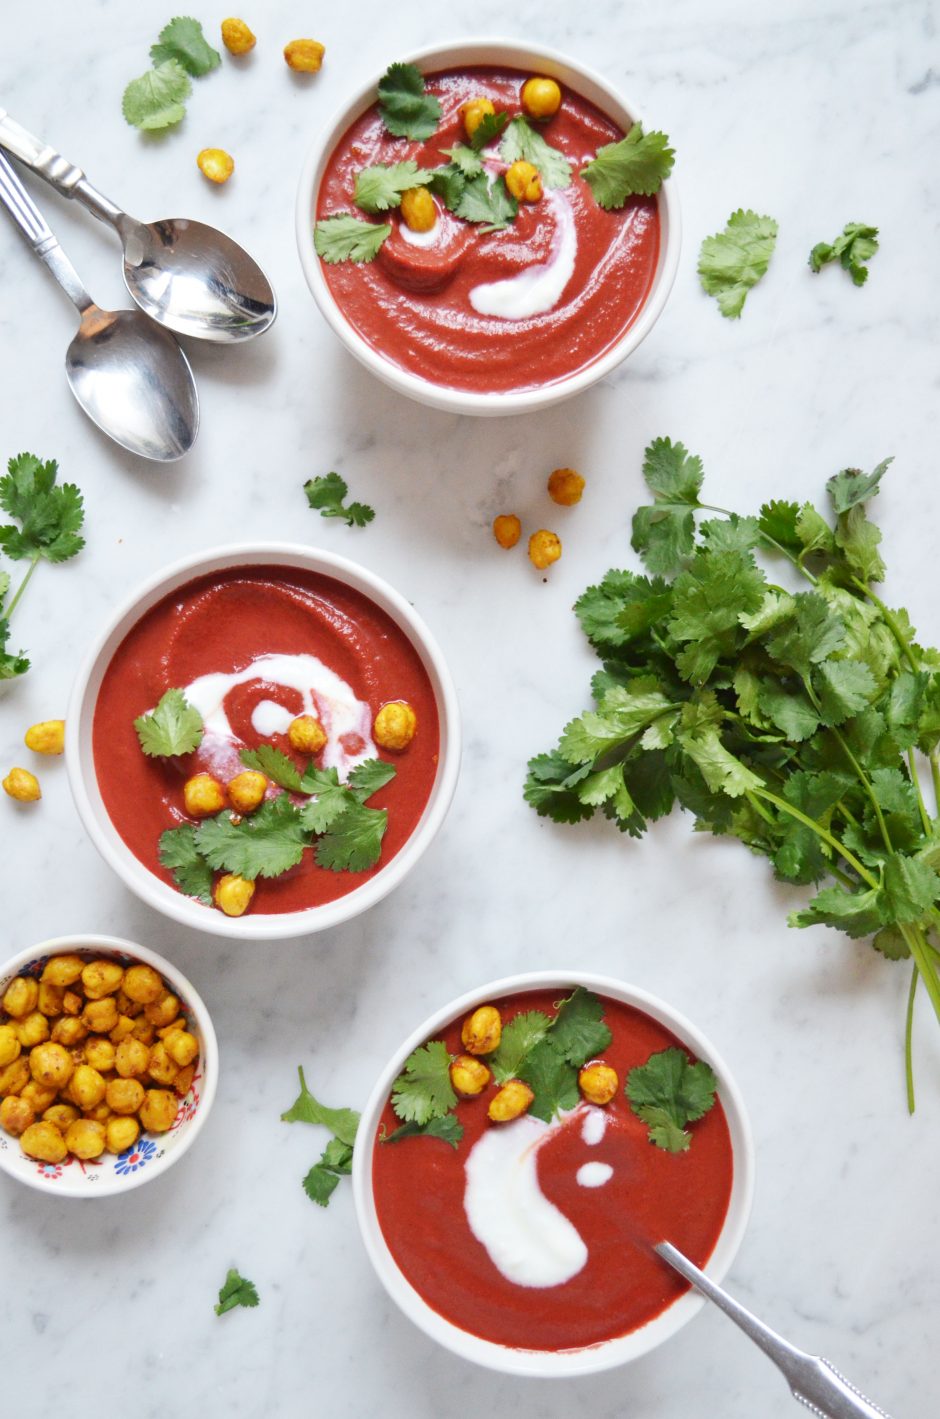 Recipe for curried beet soup with madras roasted chickpeas